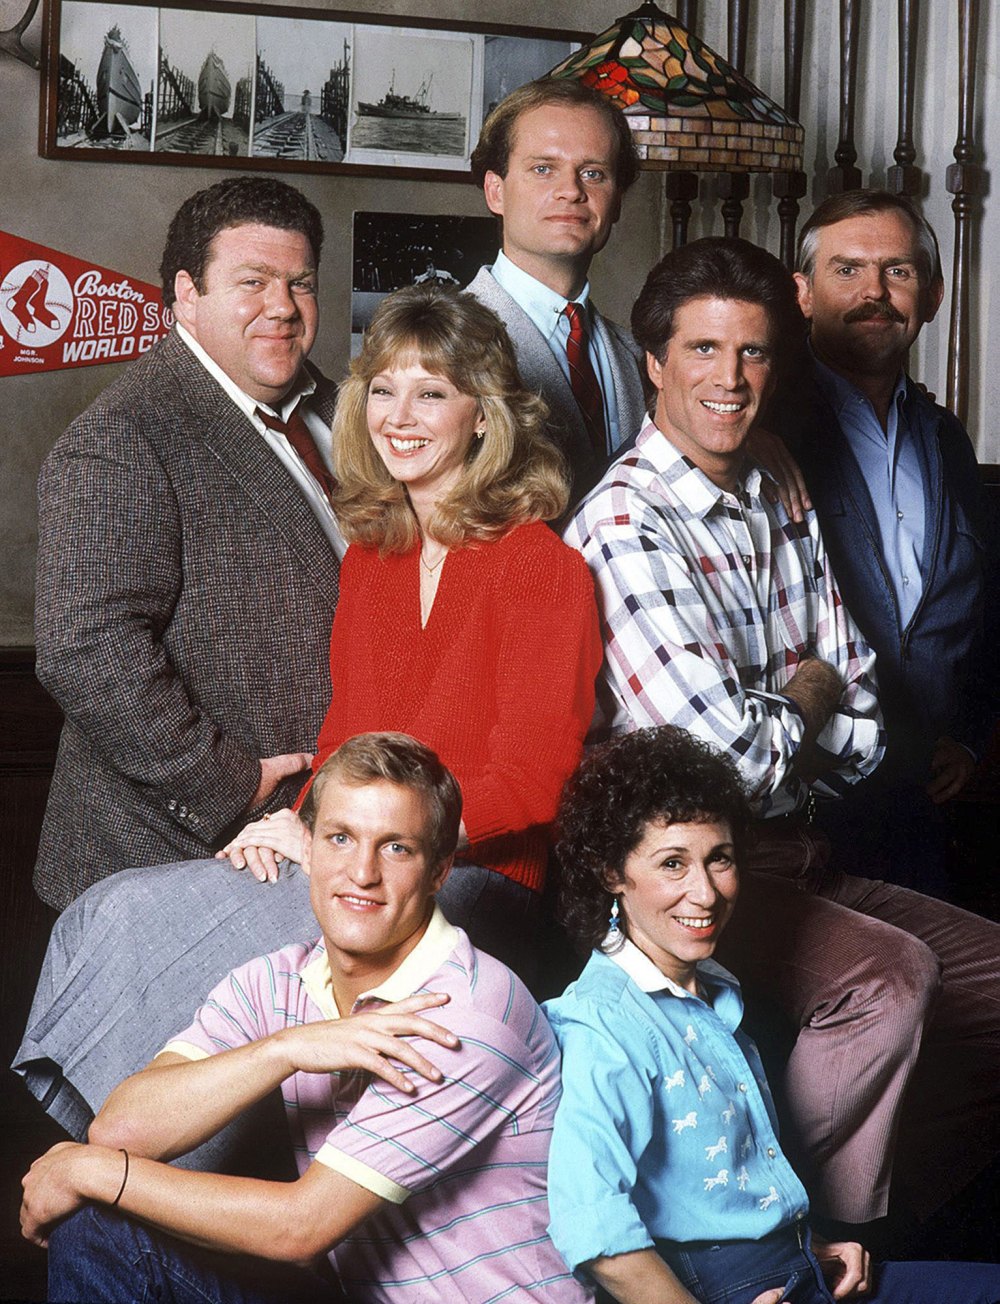 'Cheers' Cast- Where Are They Now? Ted Danson, Rhea Perlman, George Wendt and More 725